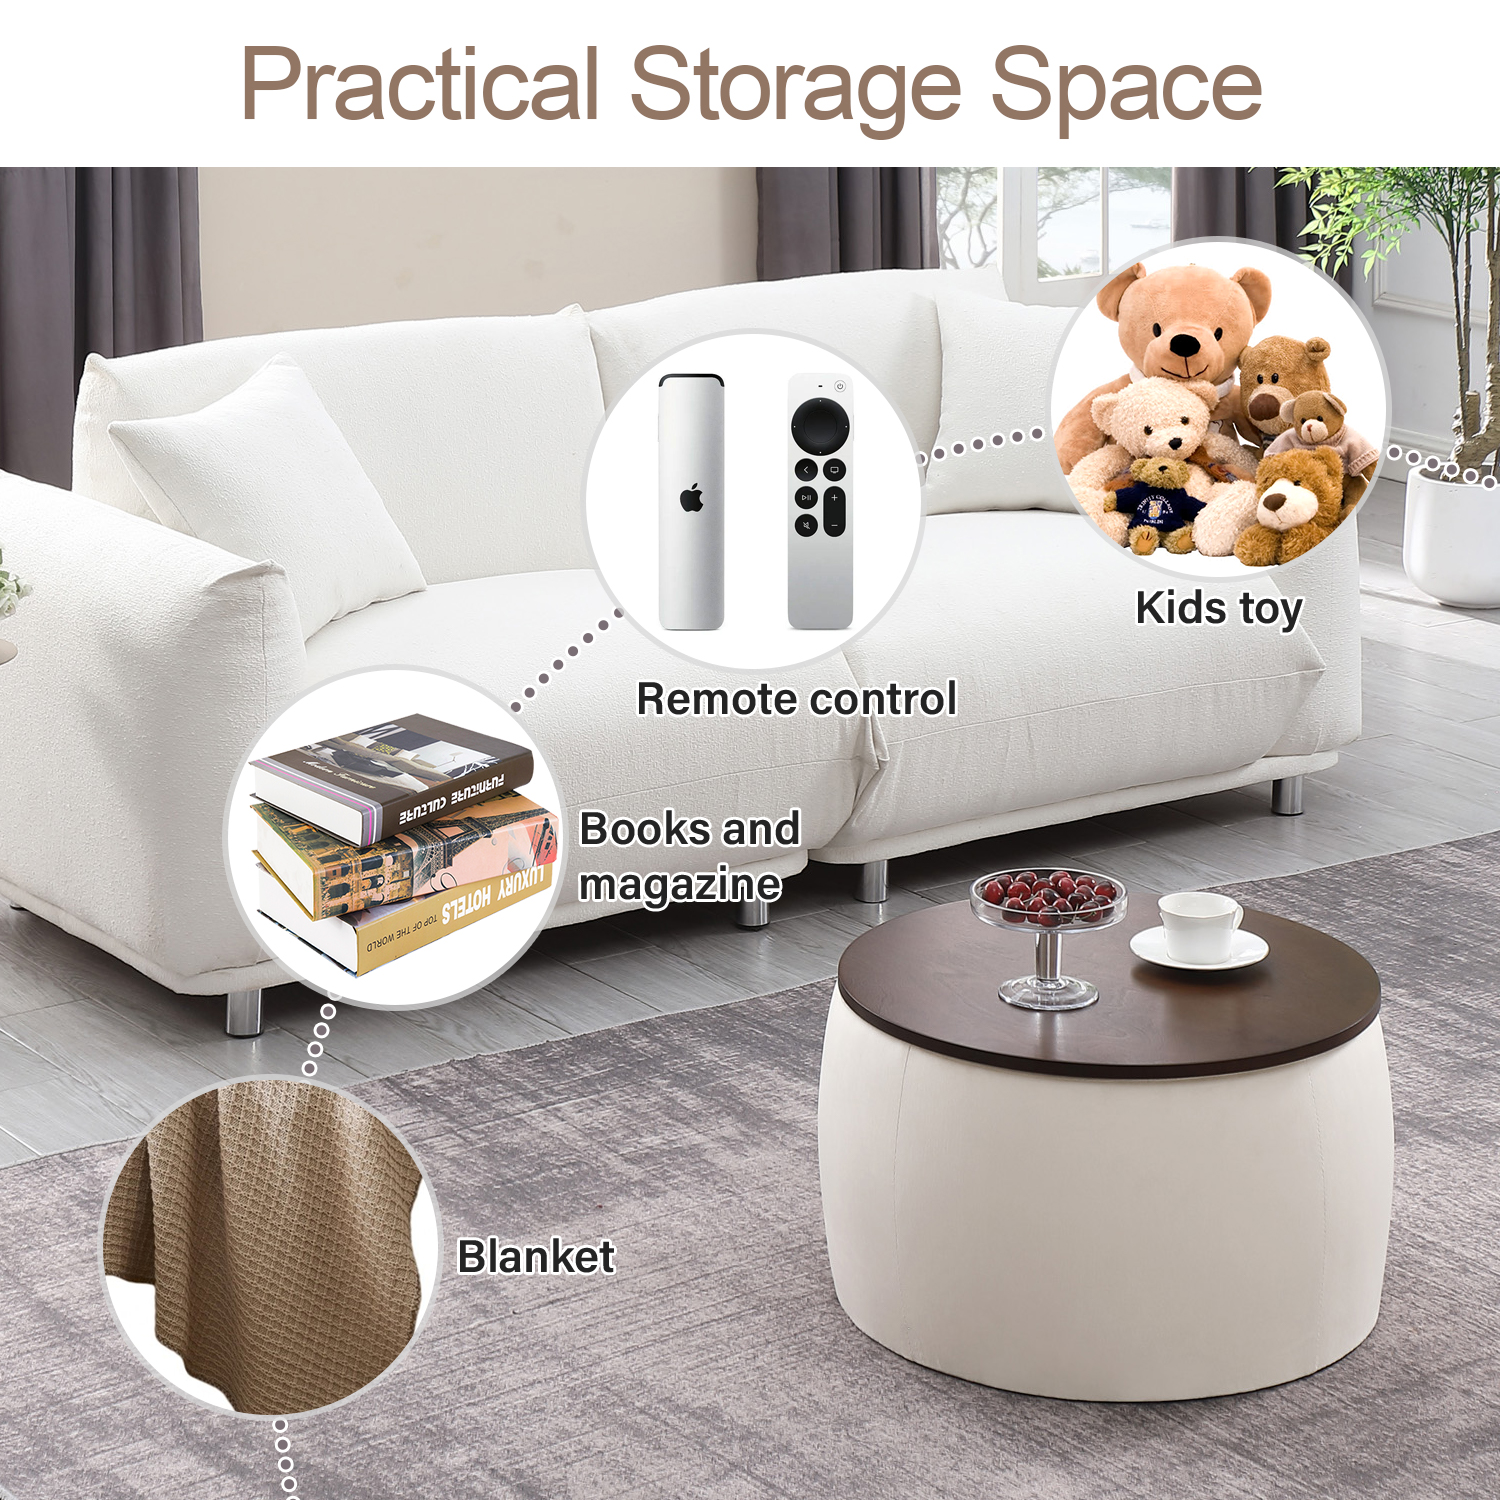 2 in 1 Storage Ottoman with Tray, Round Ottoman Coffee Table with Foot Rest, Cube Organizer, End Table for Living Room, LJ422 - image 5 of 6